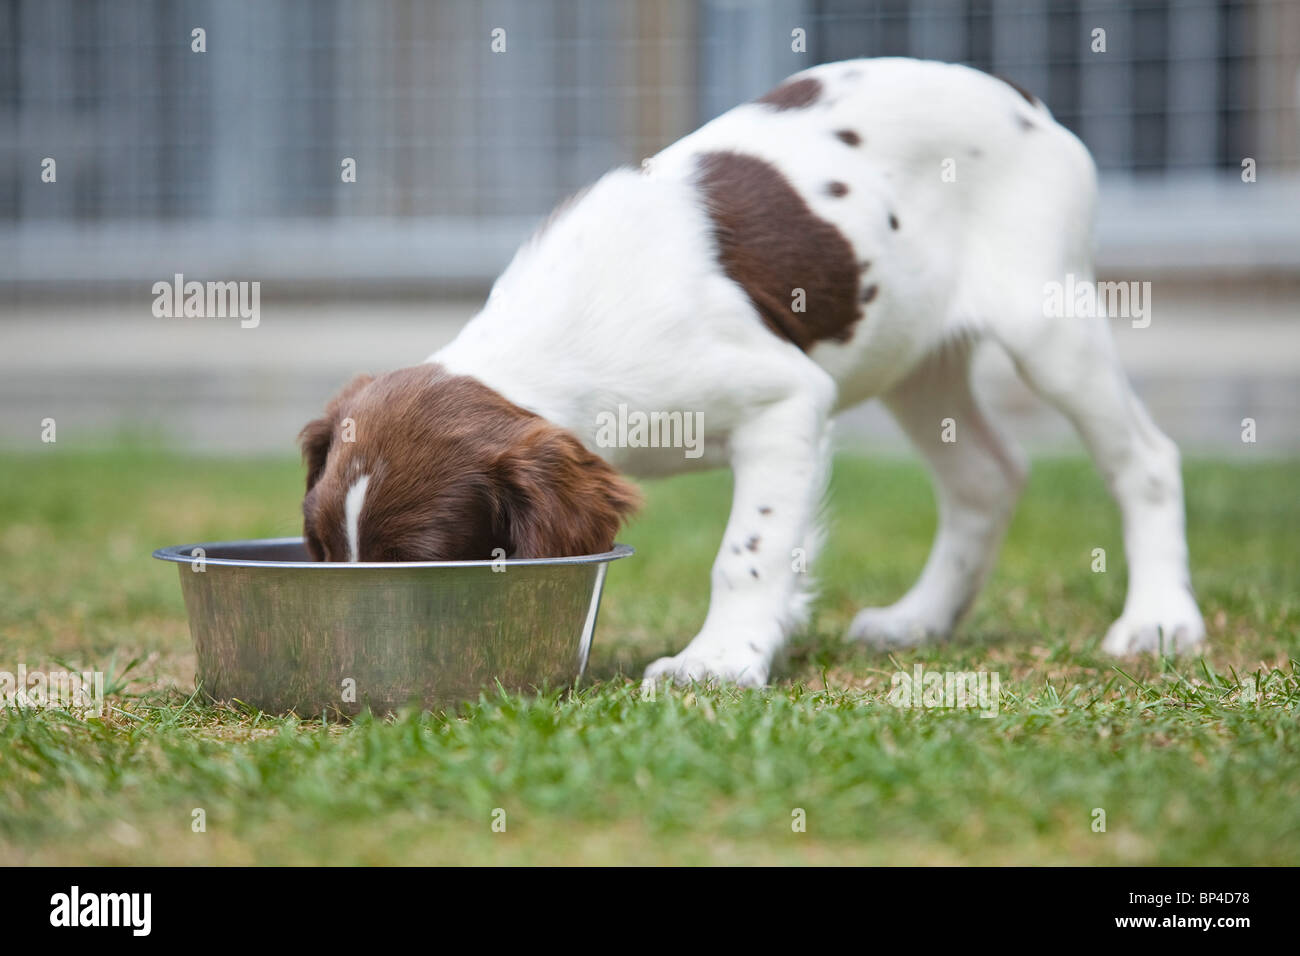 A liver and white English Springer Spaniel puppy eating dog food from a metal dog bowl placed outside in a garden on grass Stock Photo